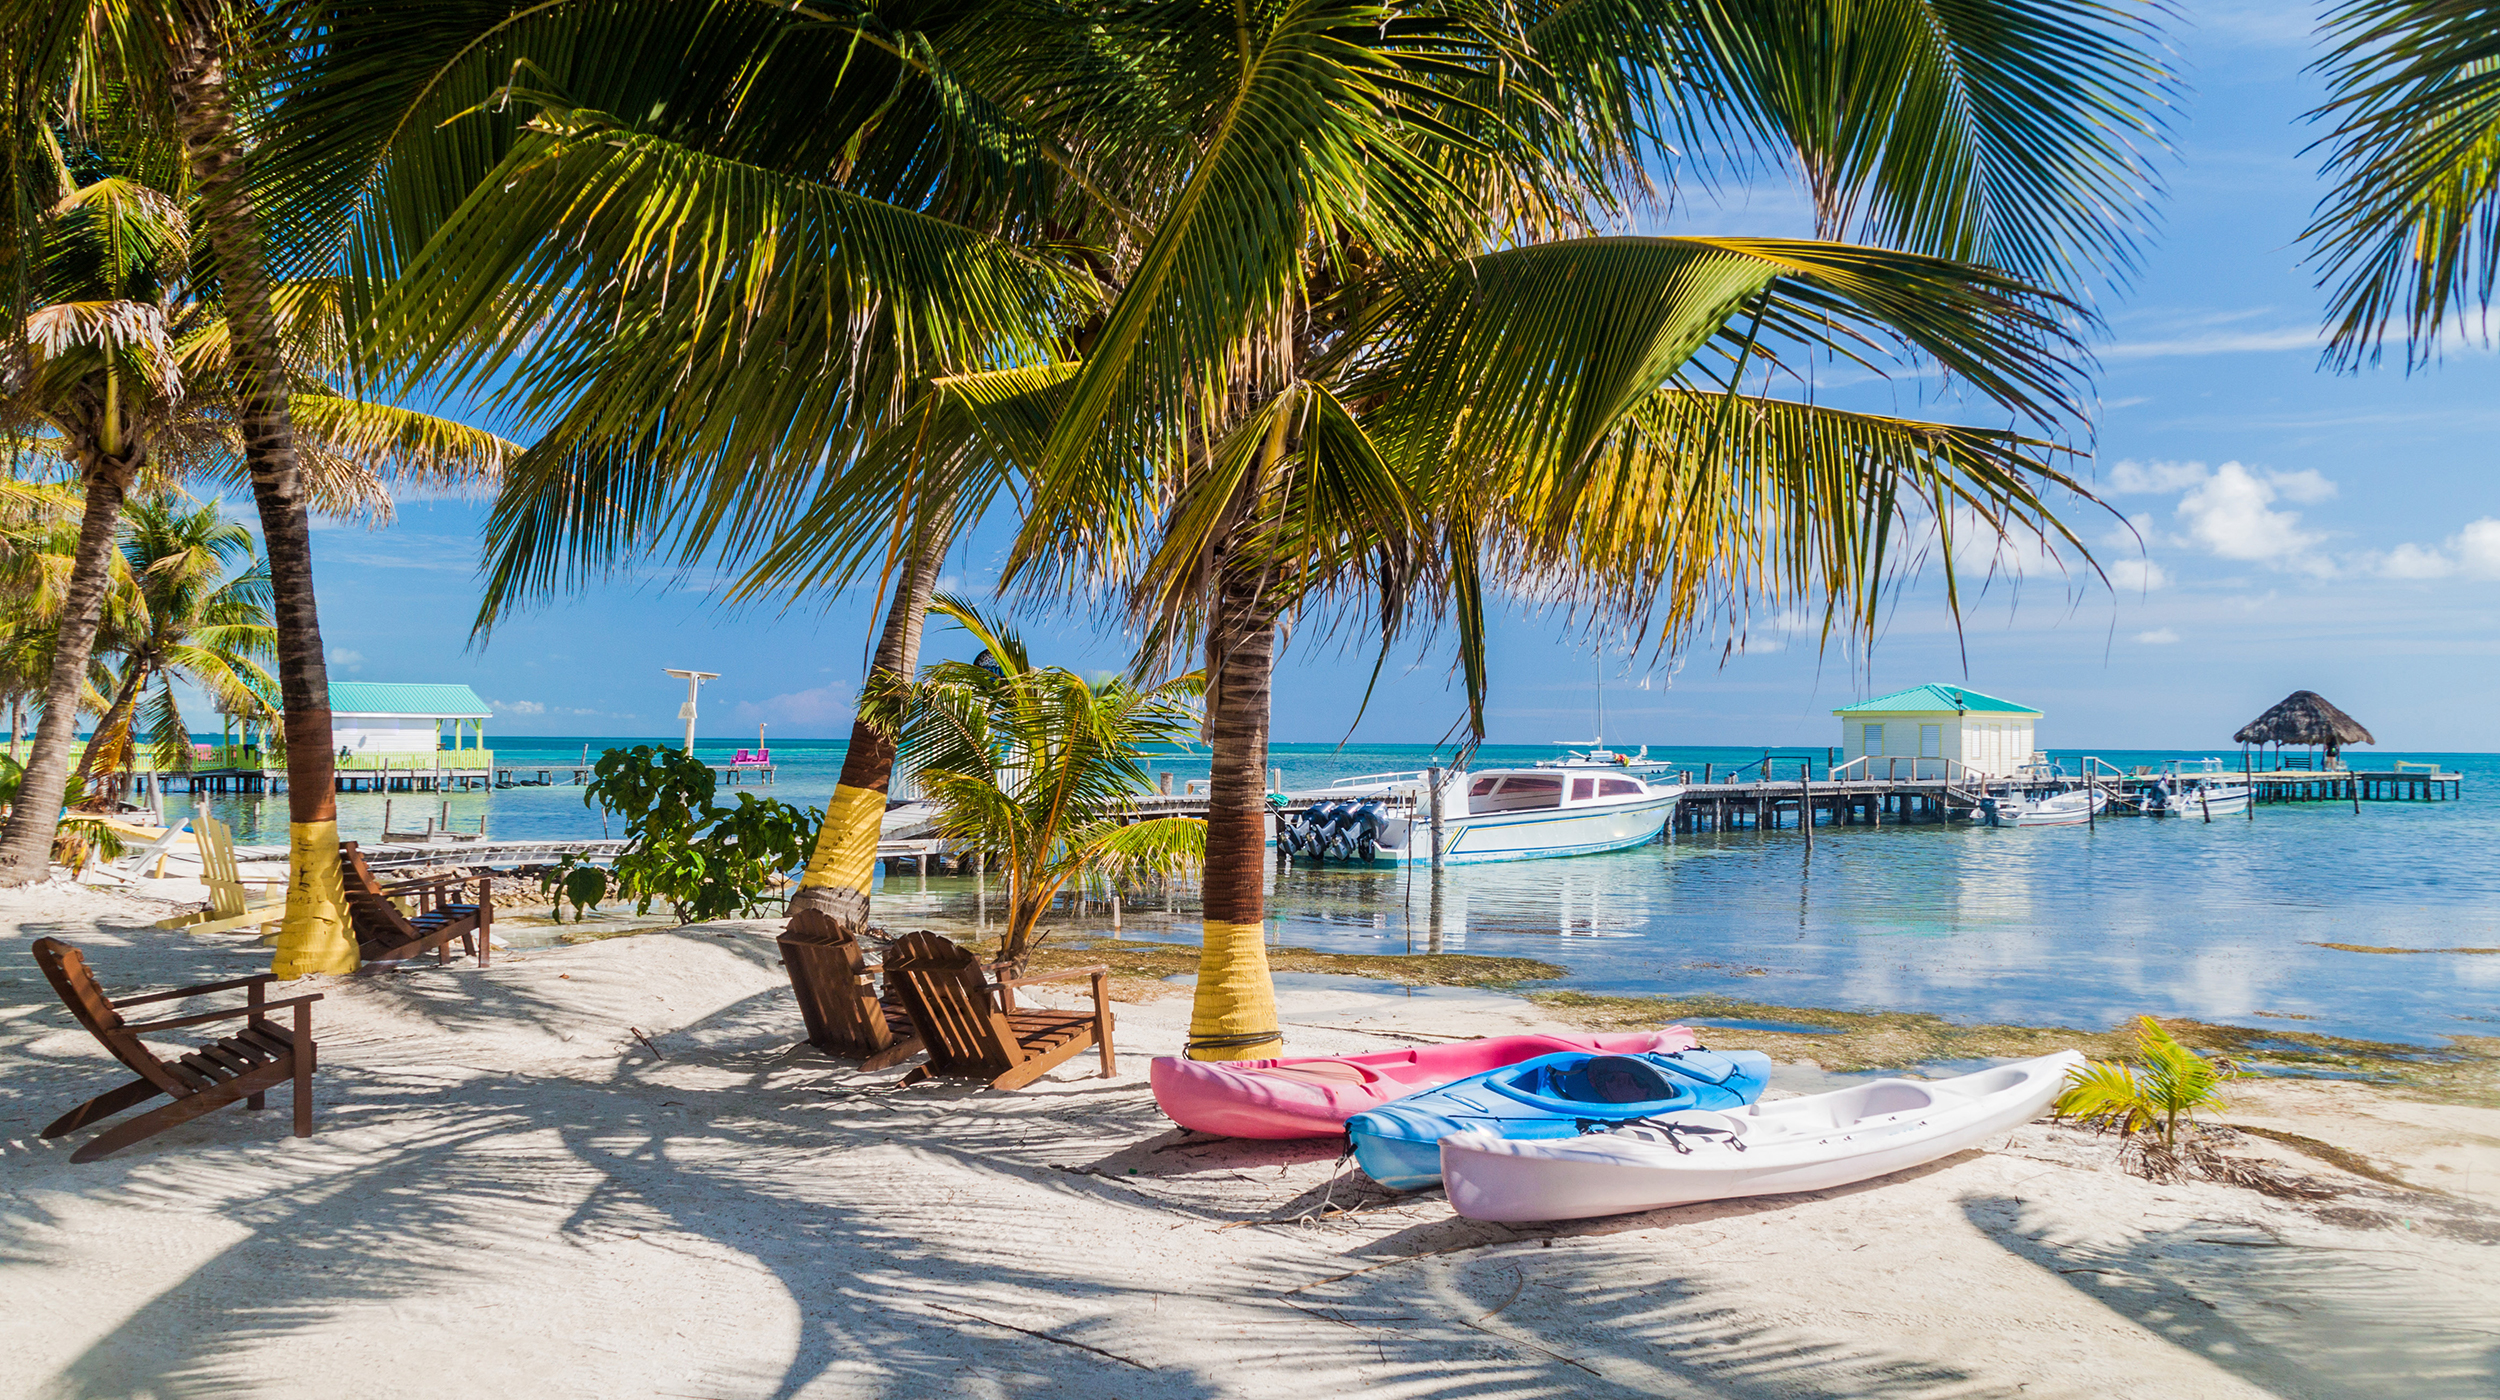 Why a Person Should Invest in Belize Real Estate